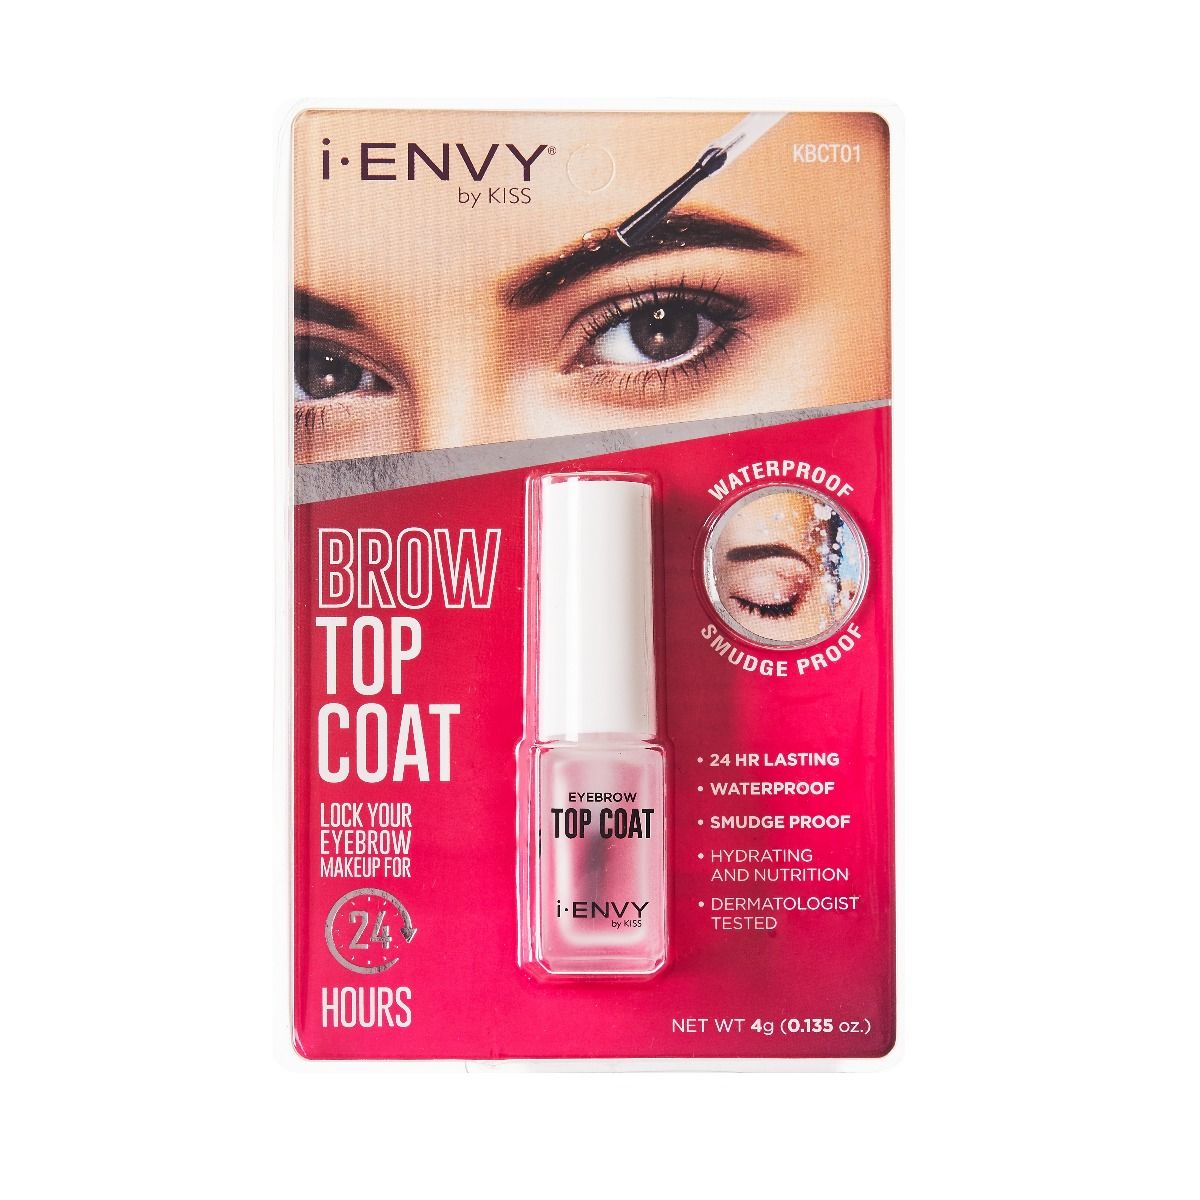 #KBCT01 iENVY by Kiss Brow Top Coat (PC)